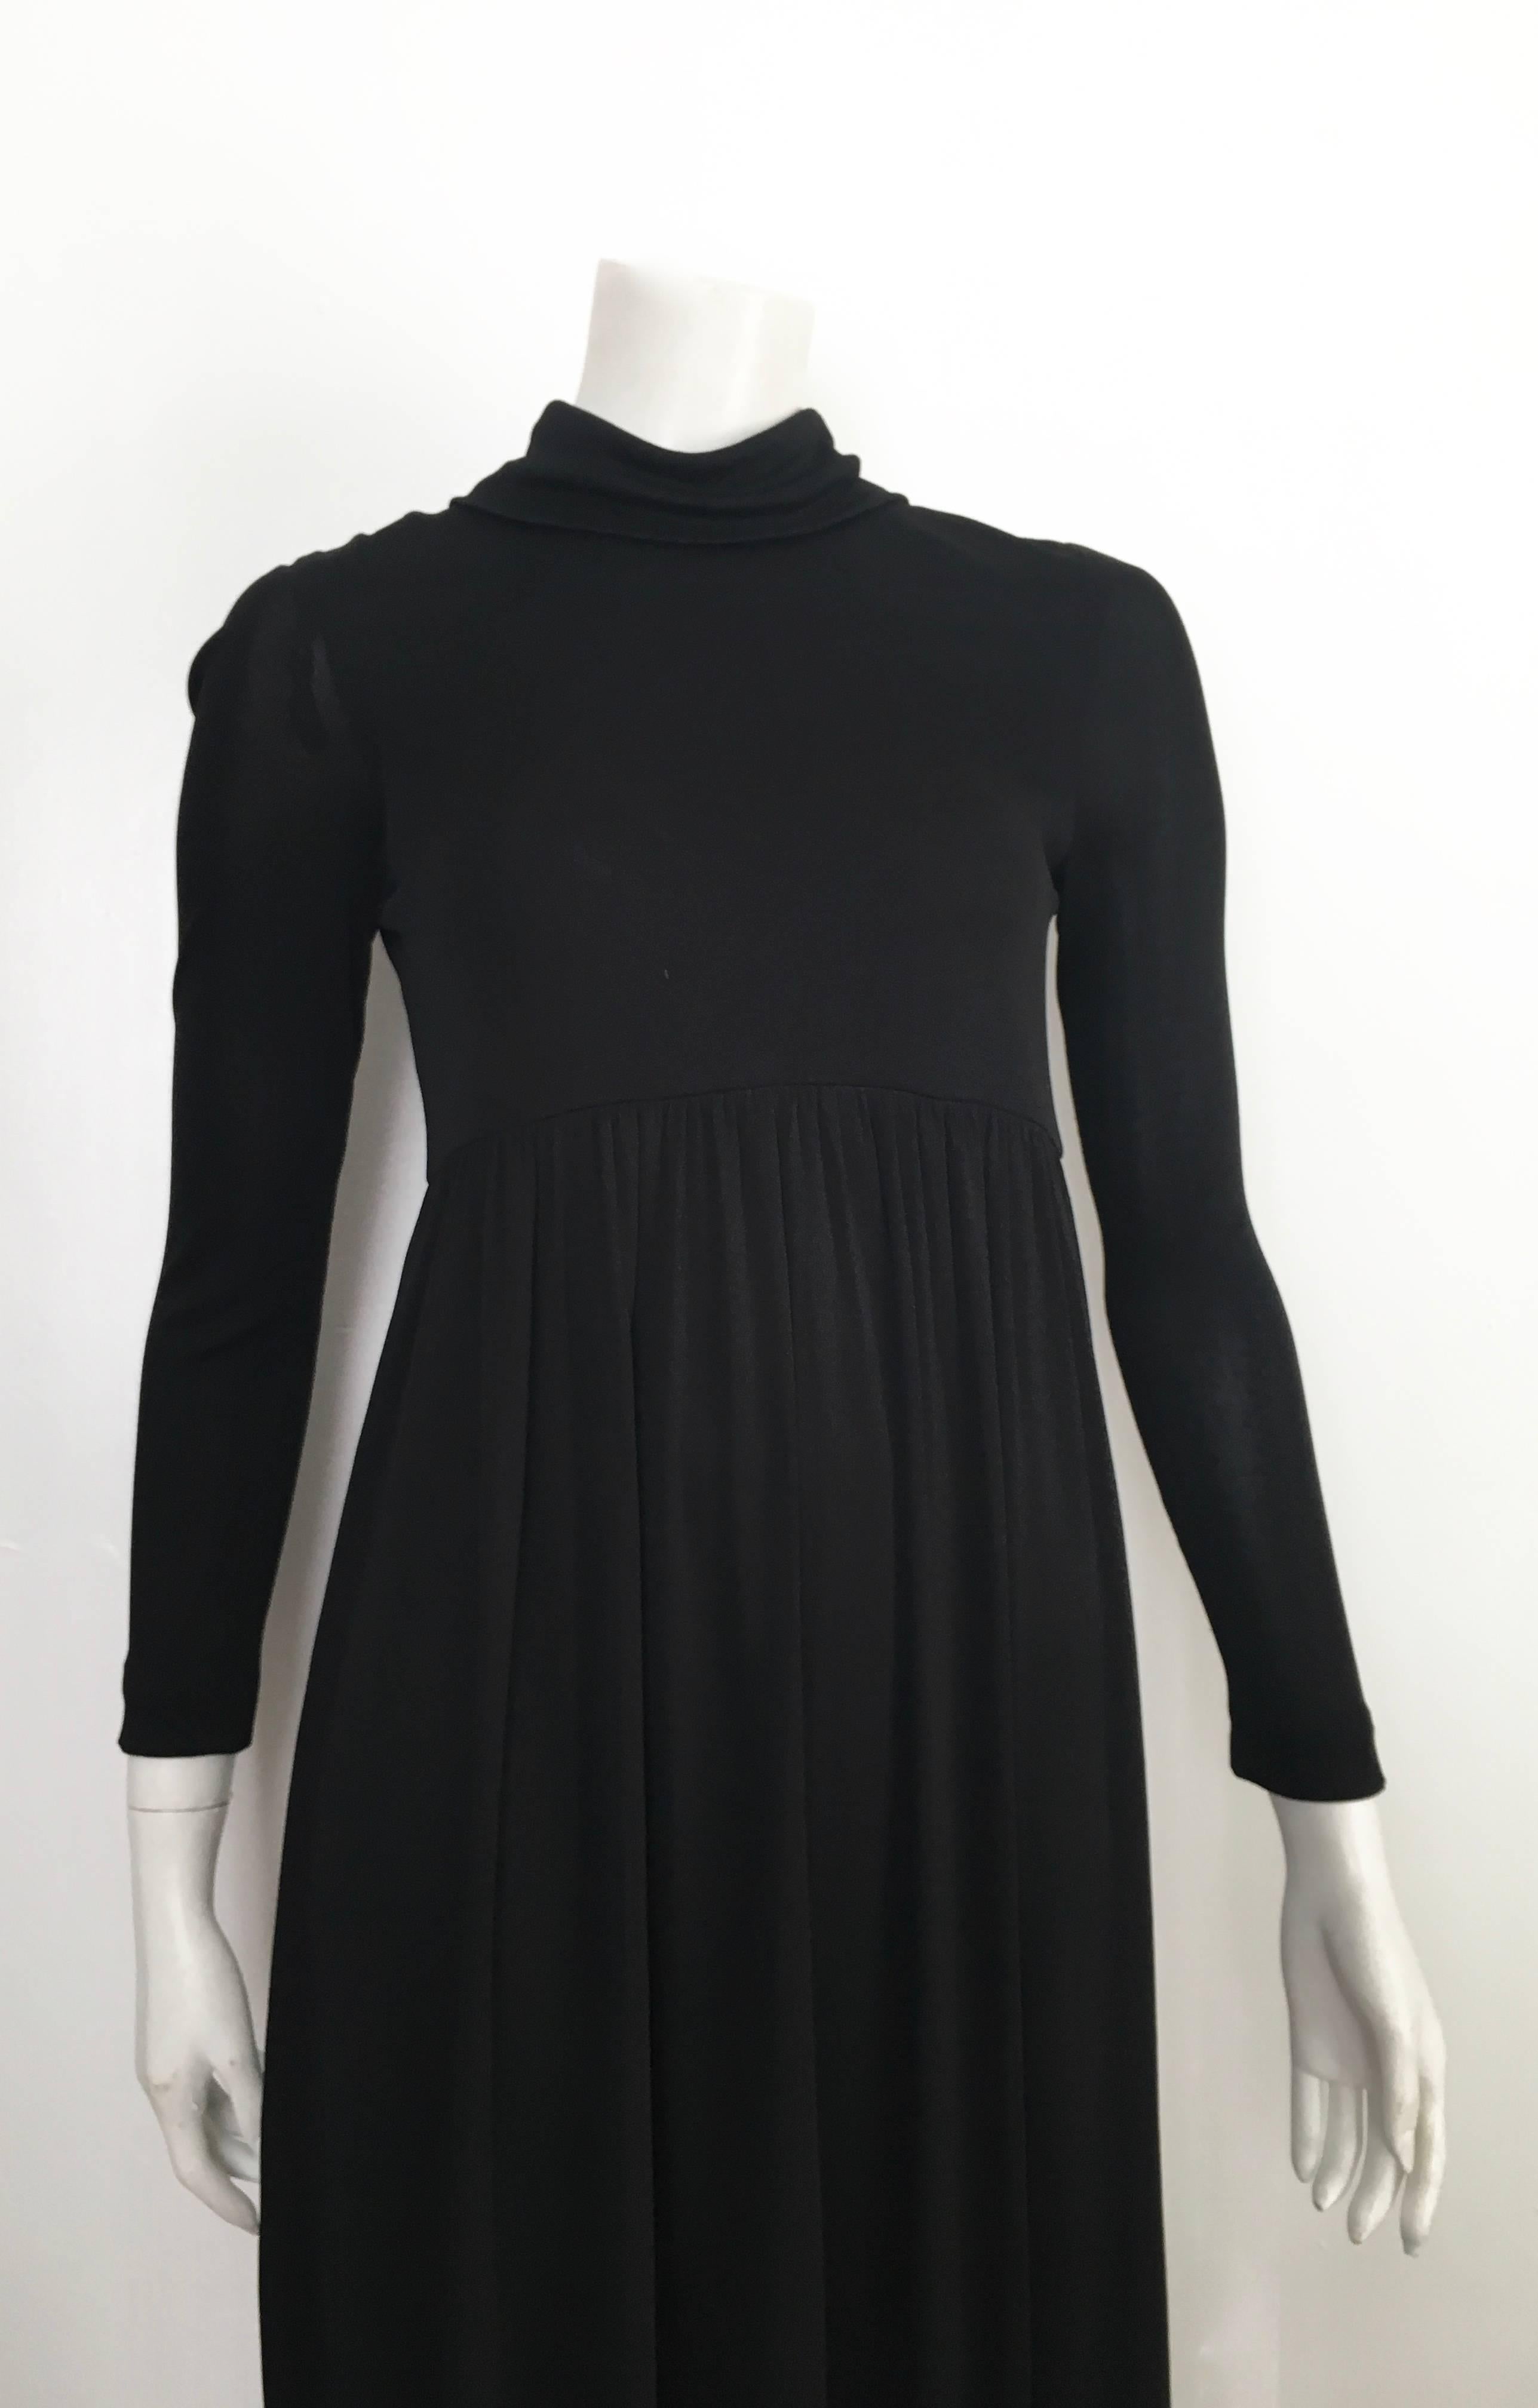 Joseph Magnin 1960s black jersey maxi long sleeve dress is labeled a vintage size 10 but fits like a size 4.  The waist on this dress is 28